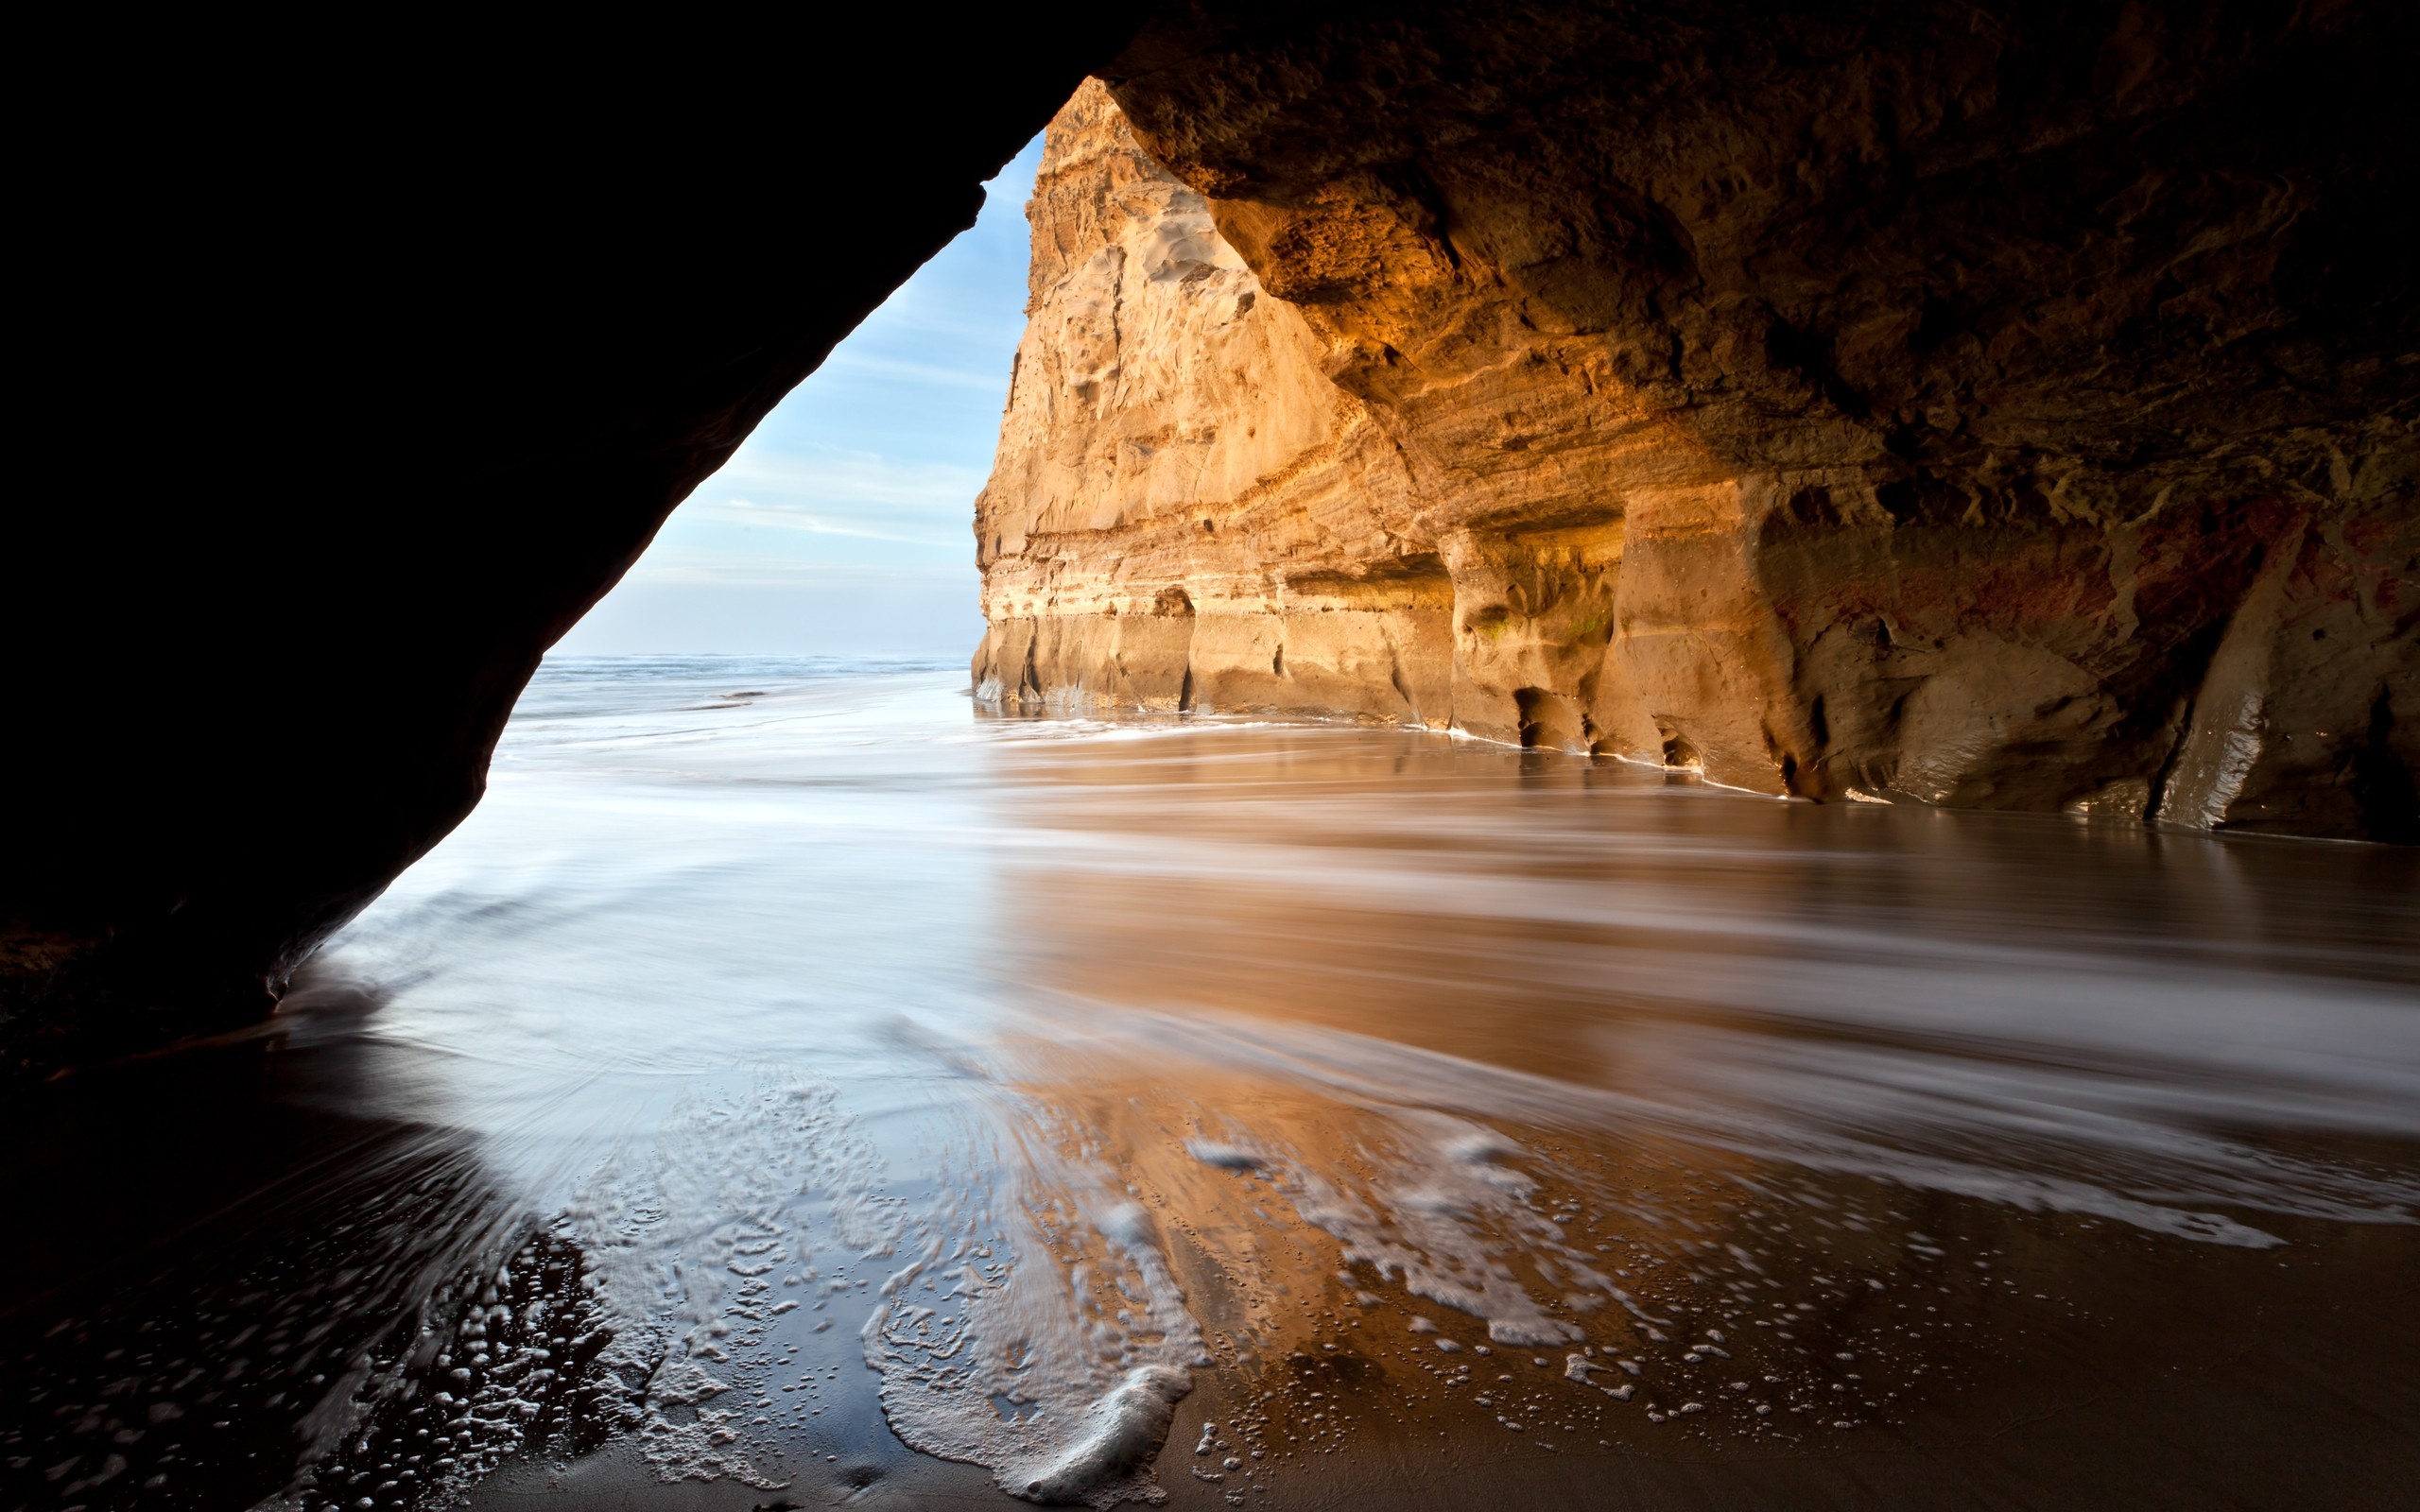 Wallpapers PC HD - Wallpaper Cave